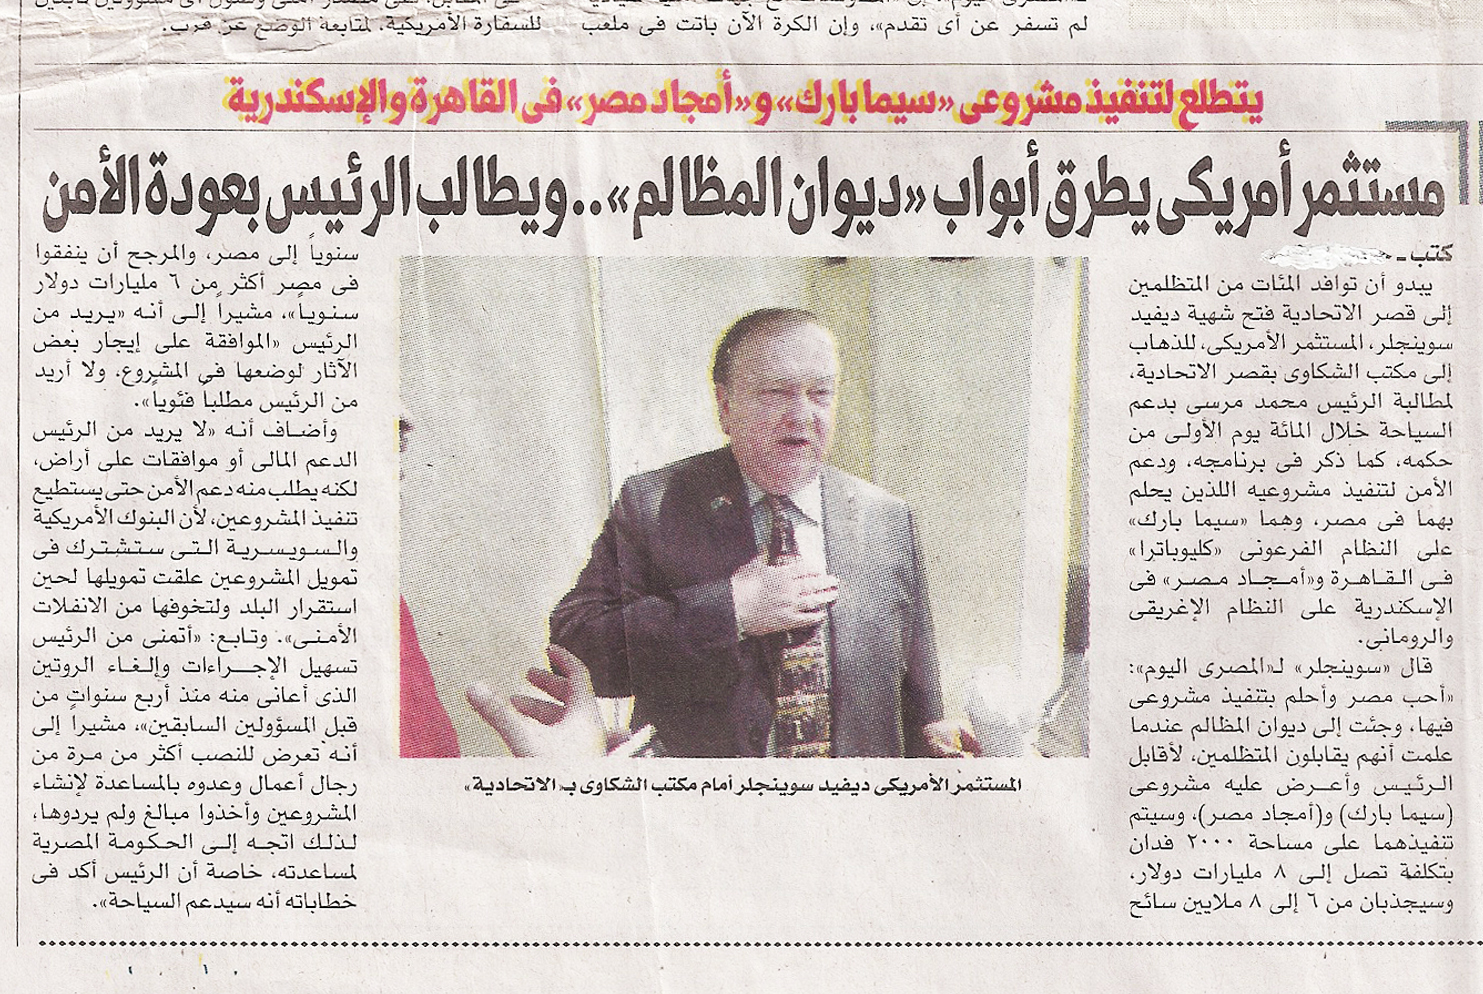 Front page Cairo newspaper Al-Masry Al-Youm July 15, 2012 with story of David H Swingler's visit to President Morsi to whom he delivered plans for his two Egypt theme parks. 